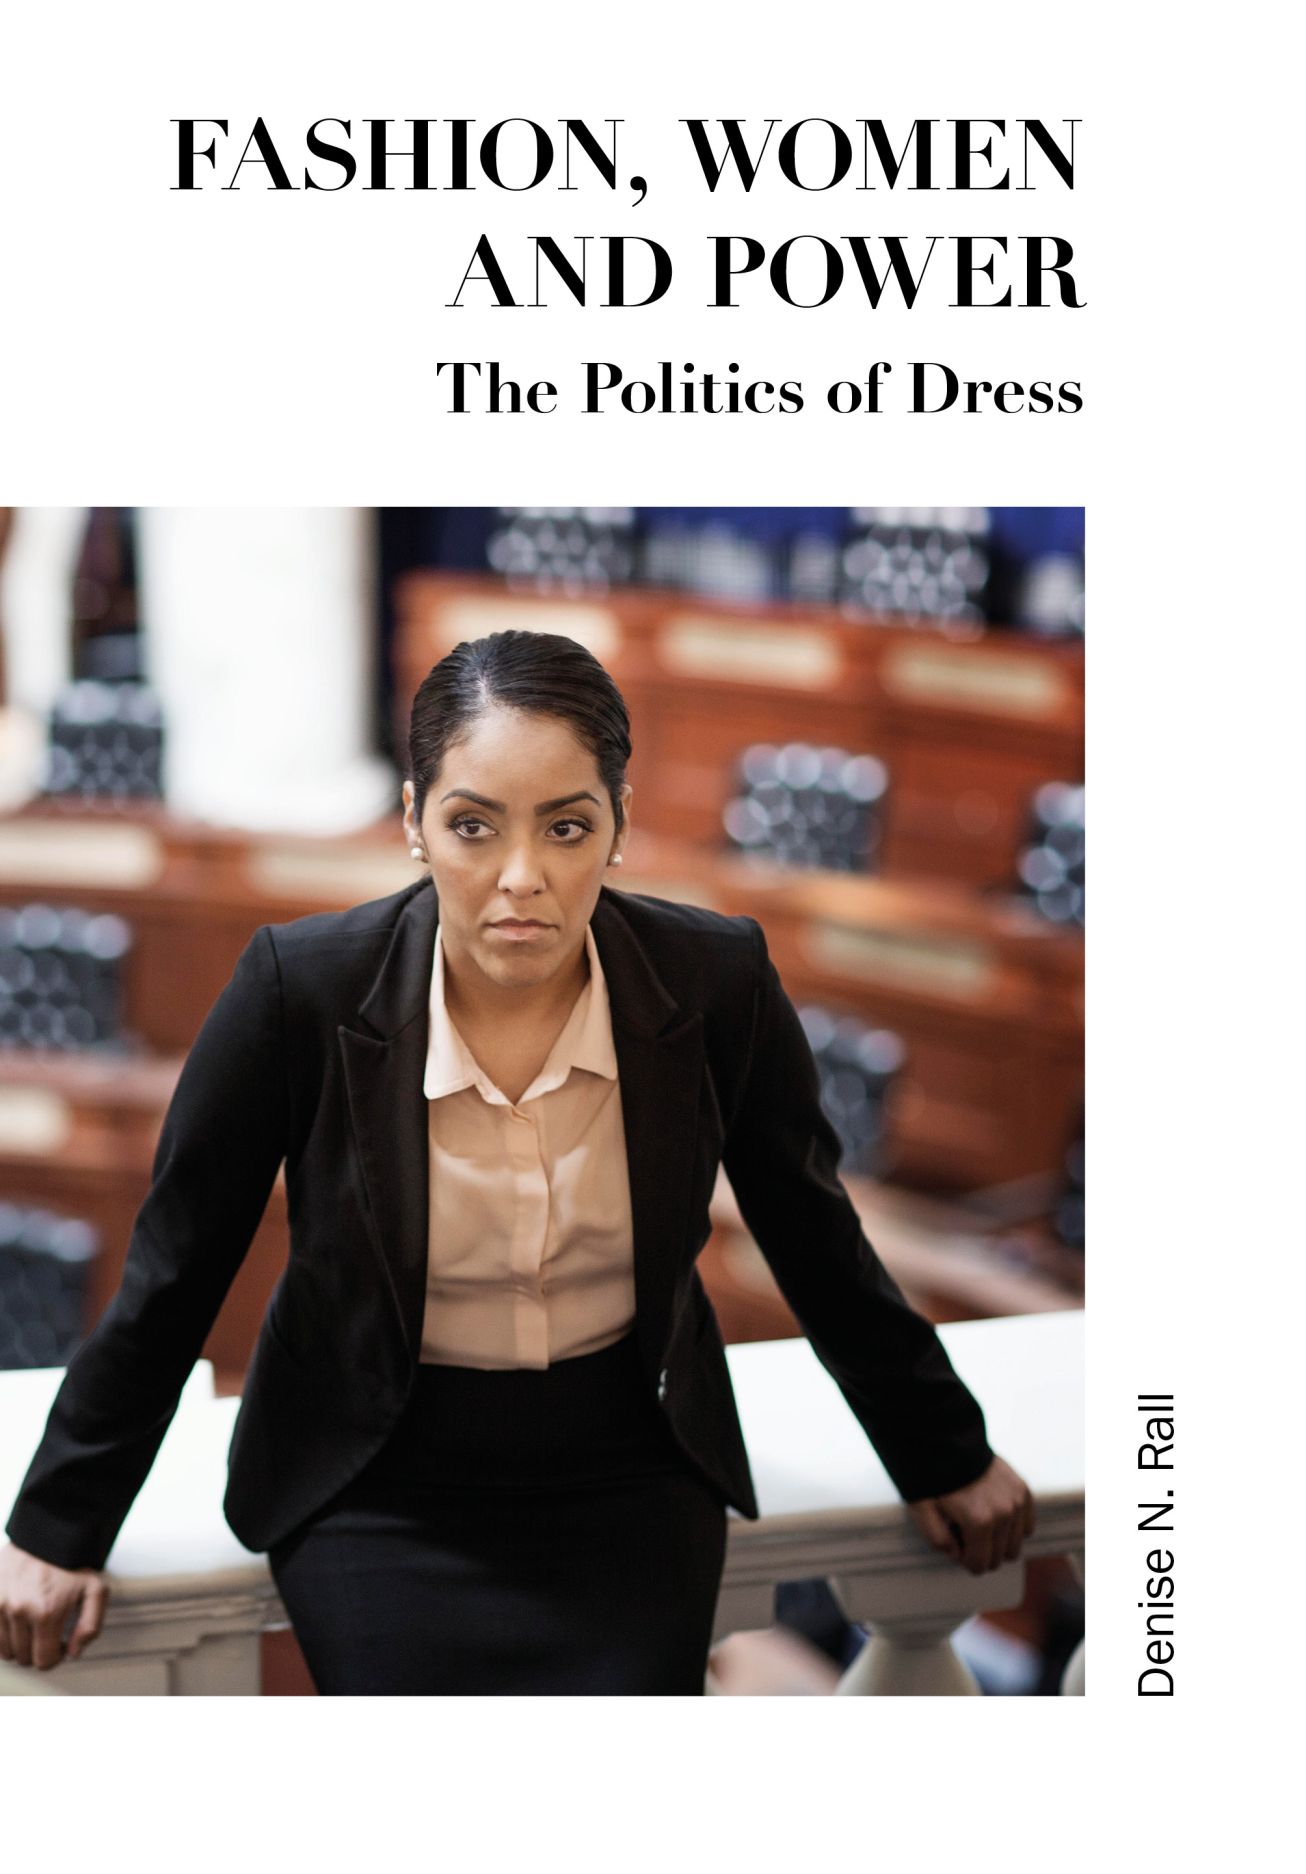 Fashion, Women and Power: The Politics of Dress, Rall